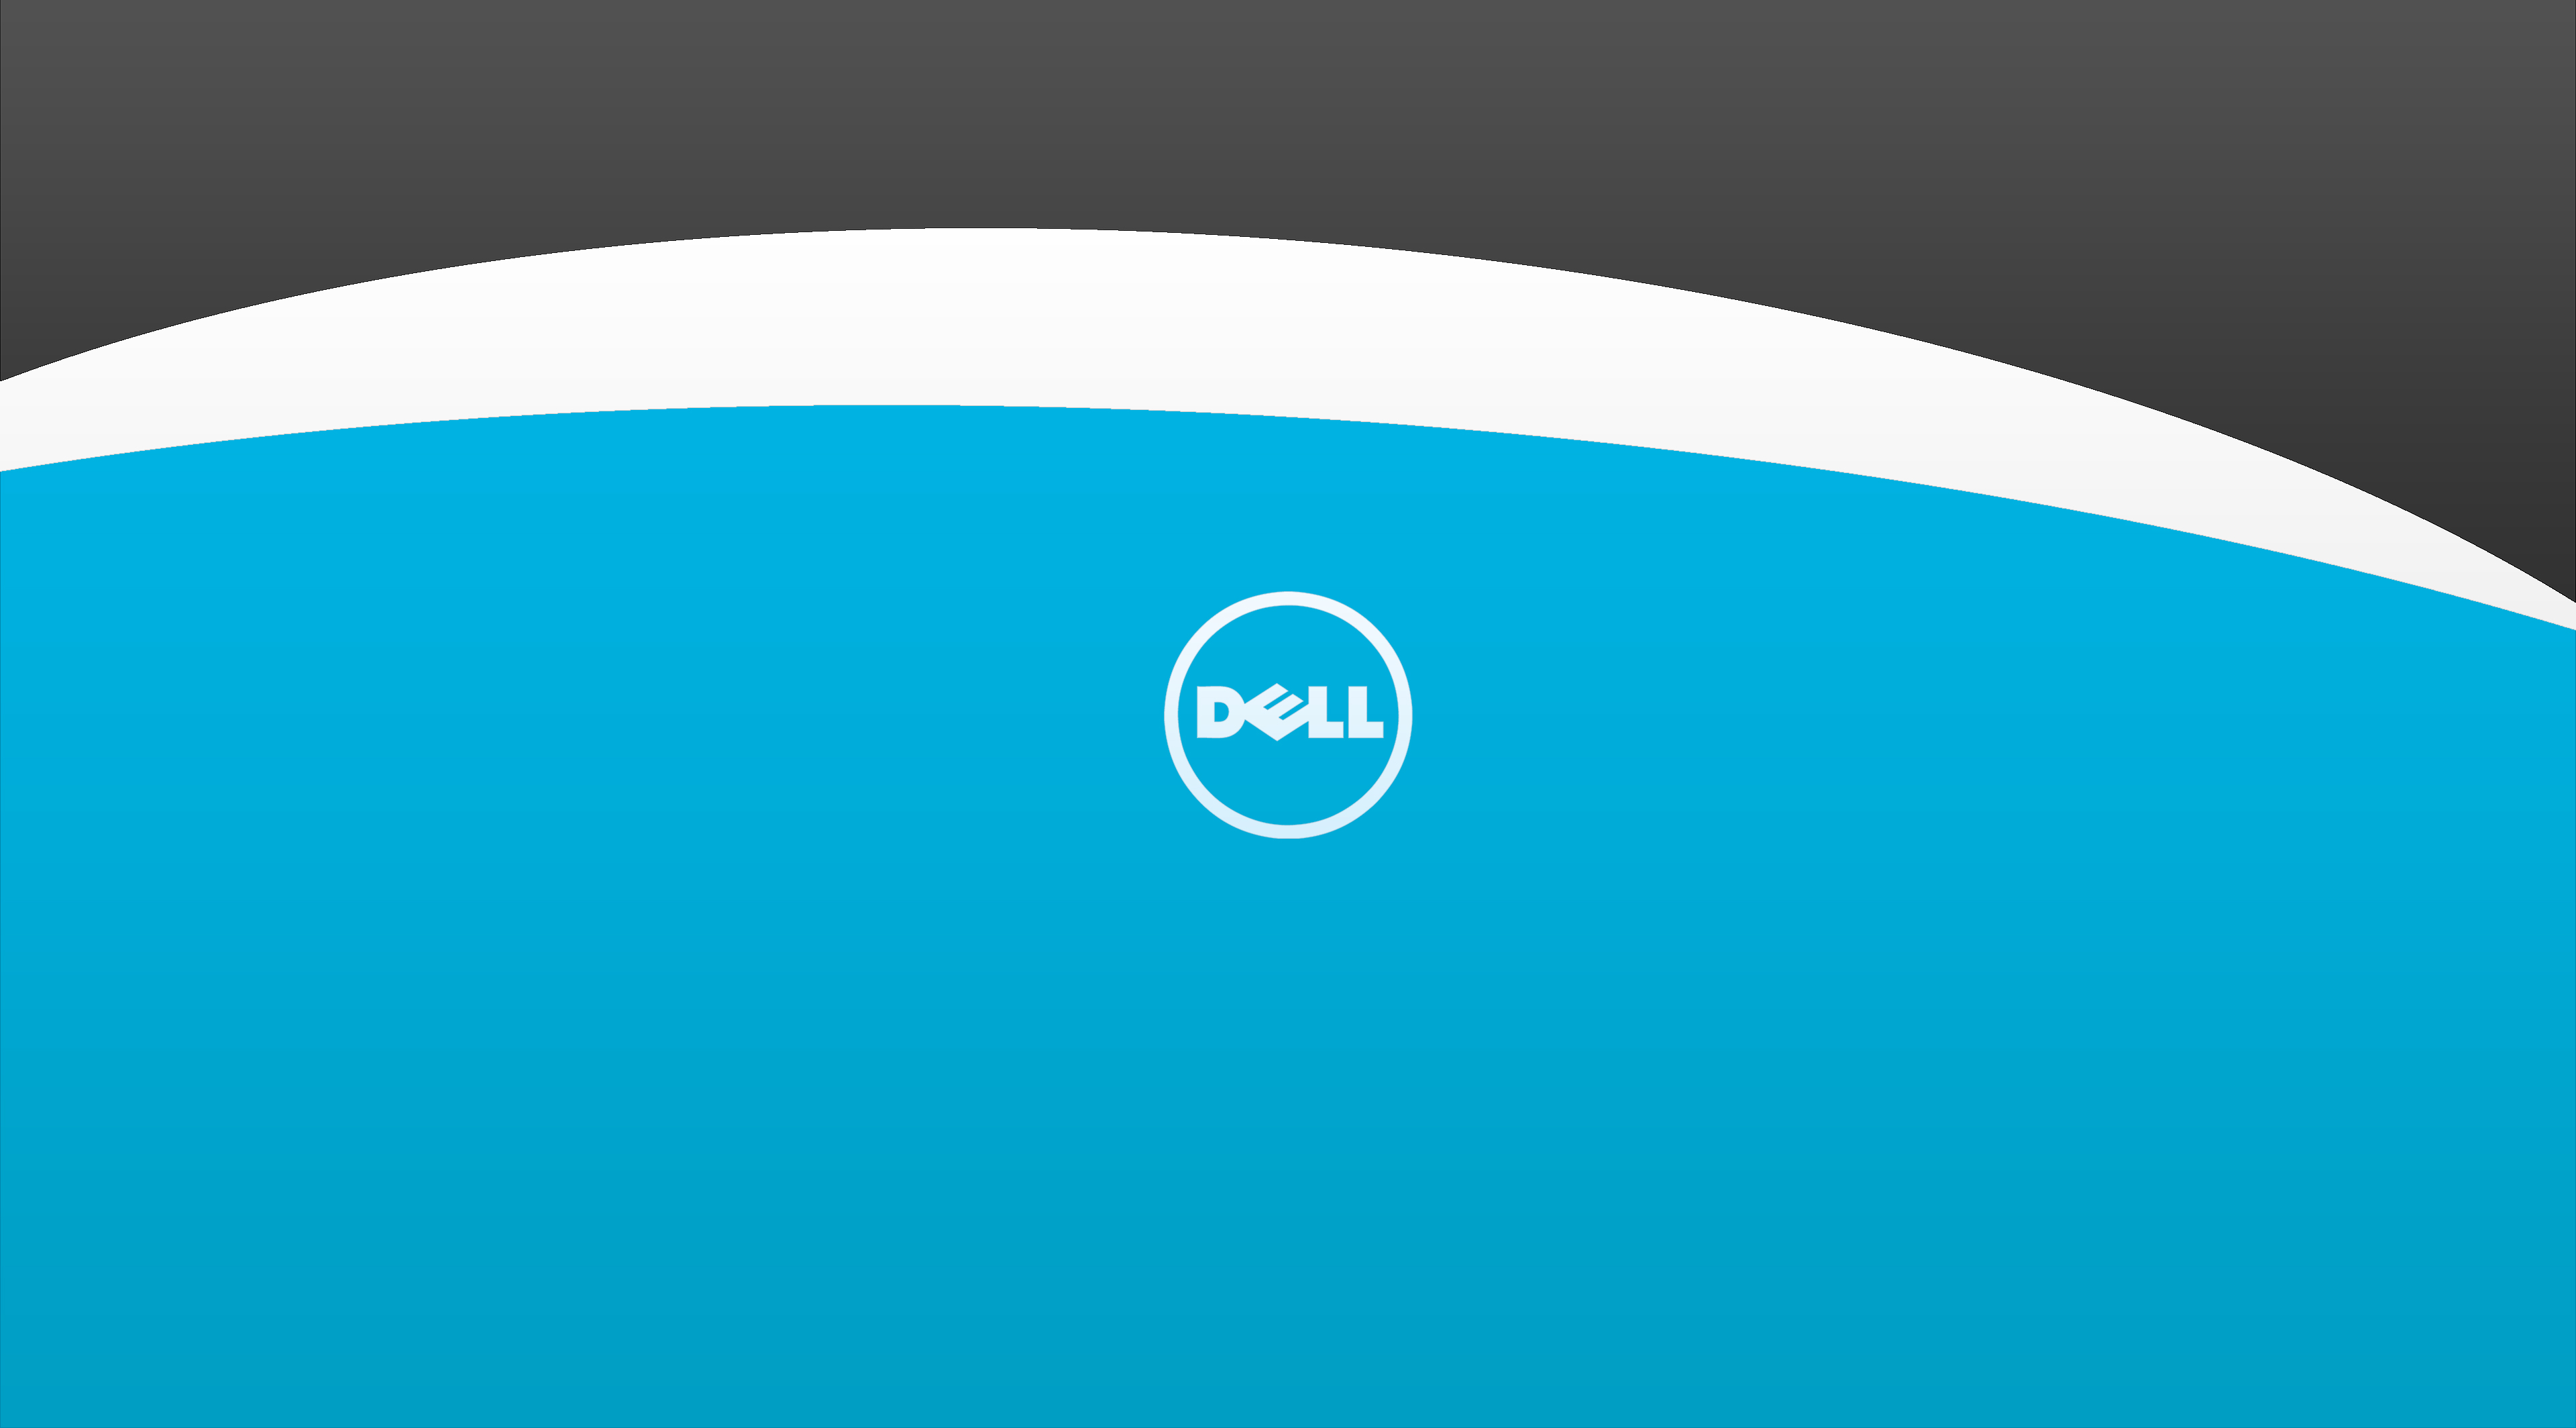 technology, dell